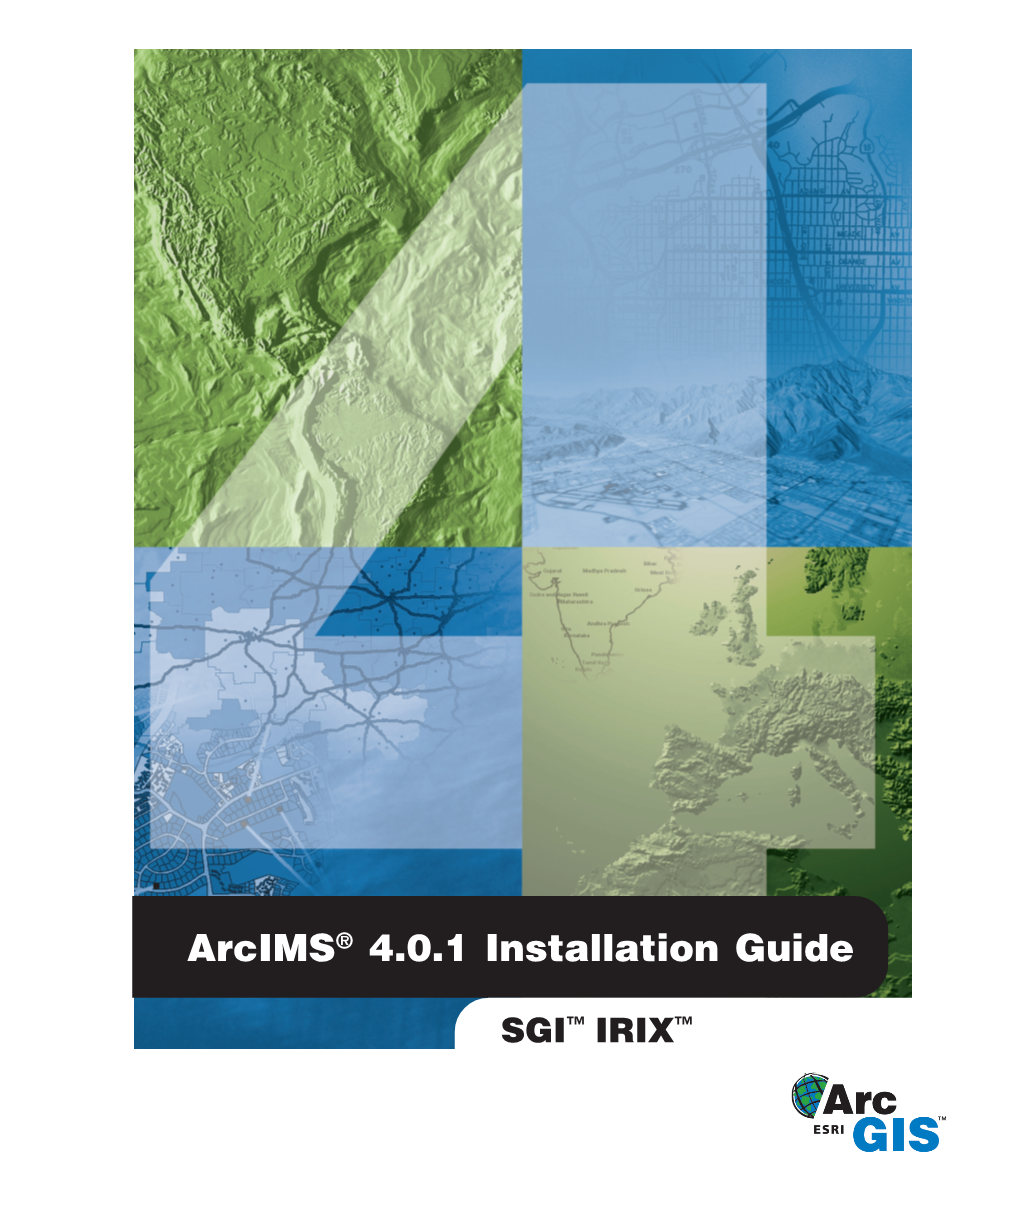 Installation Guide for Arcims 4.0.1 For